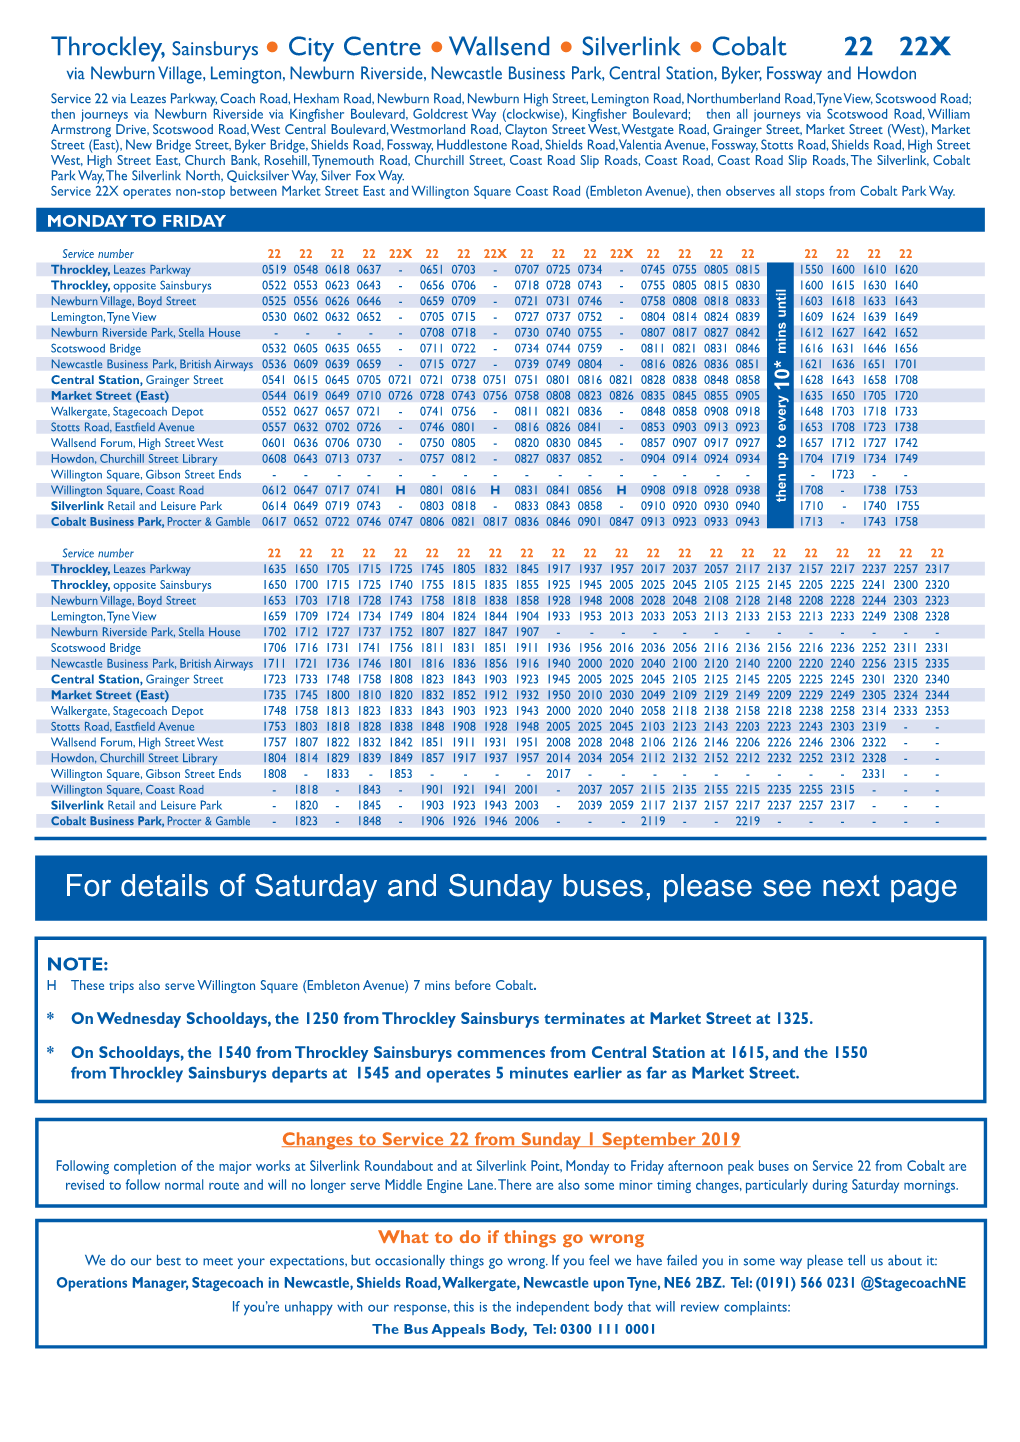 For Details of Saturday and Sunday Buses, Please See Next Page